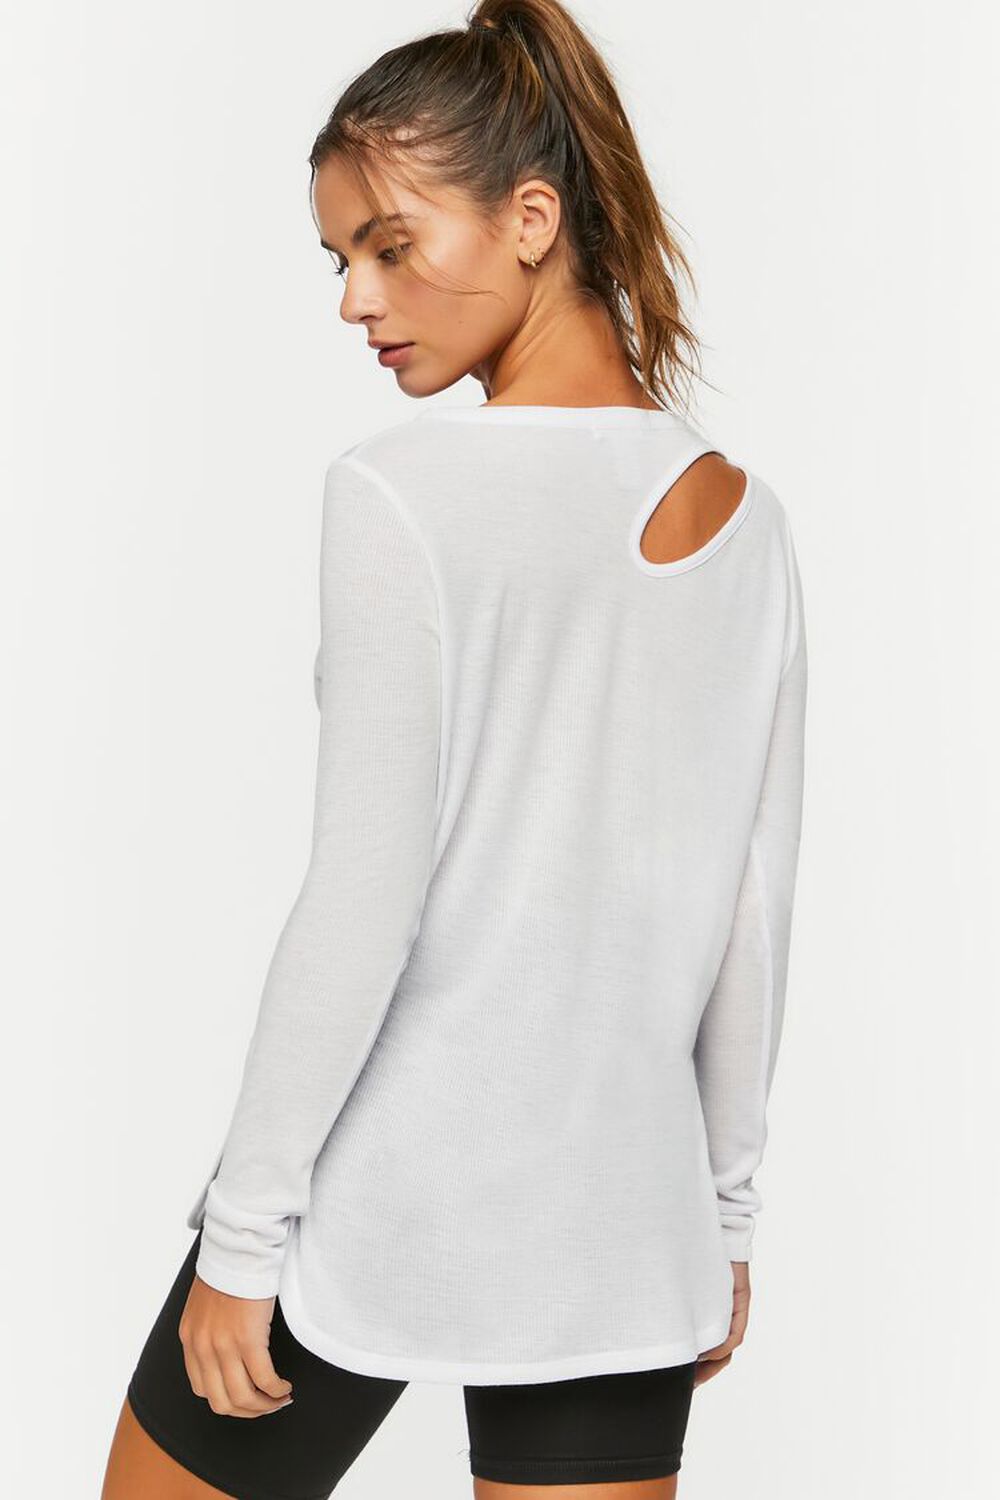 WHITE Active Cutout Long-Sleeve Top, image 3